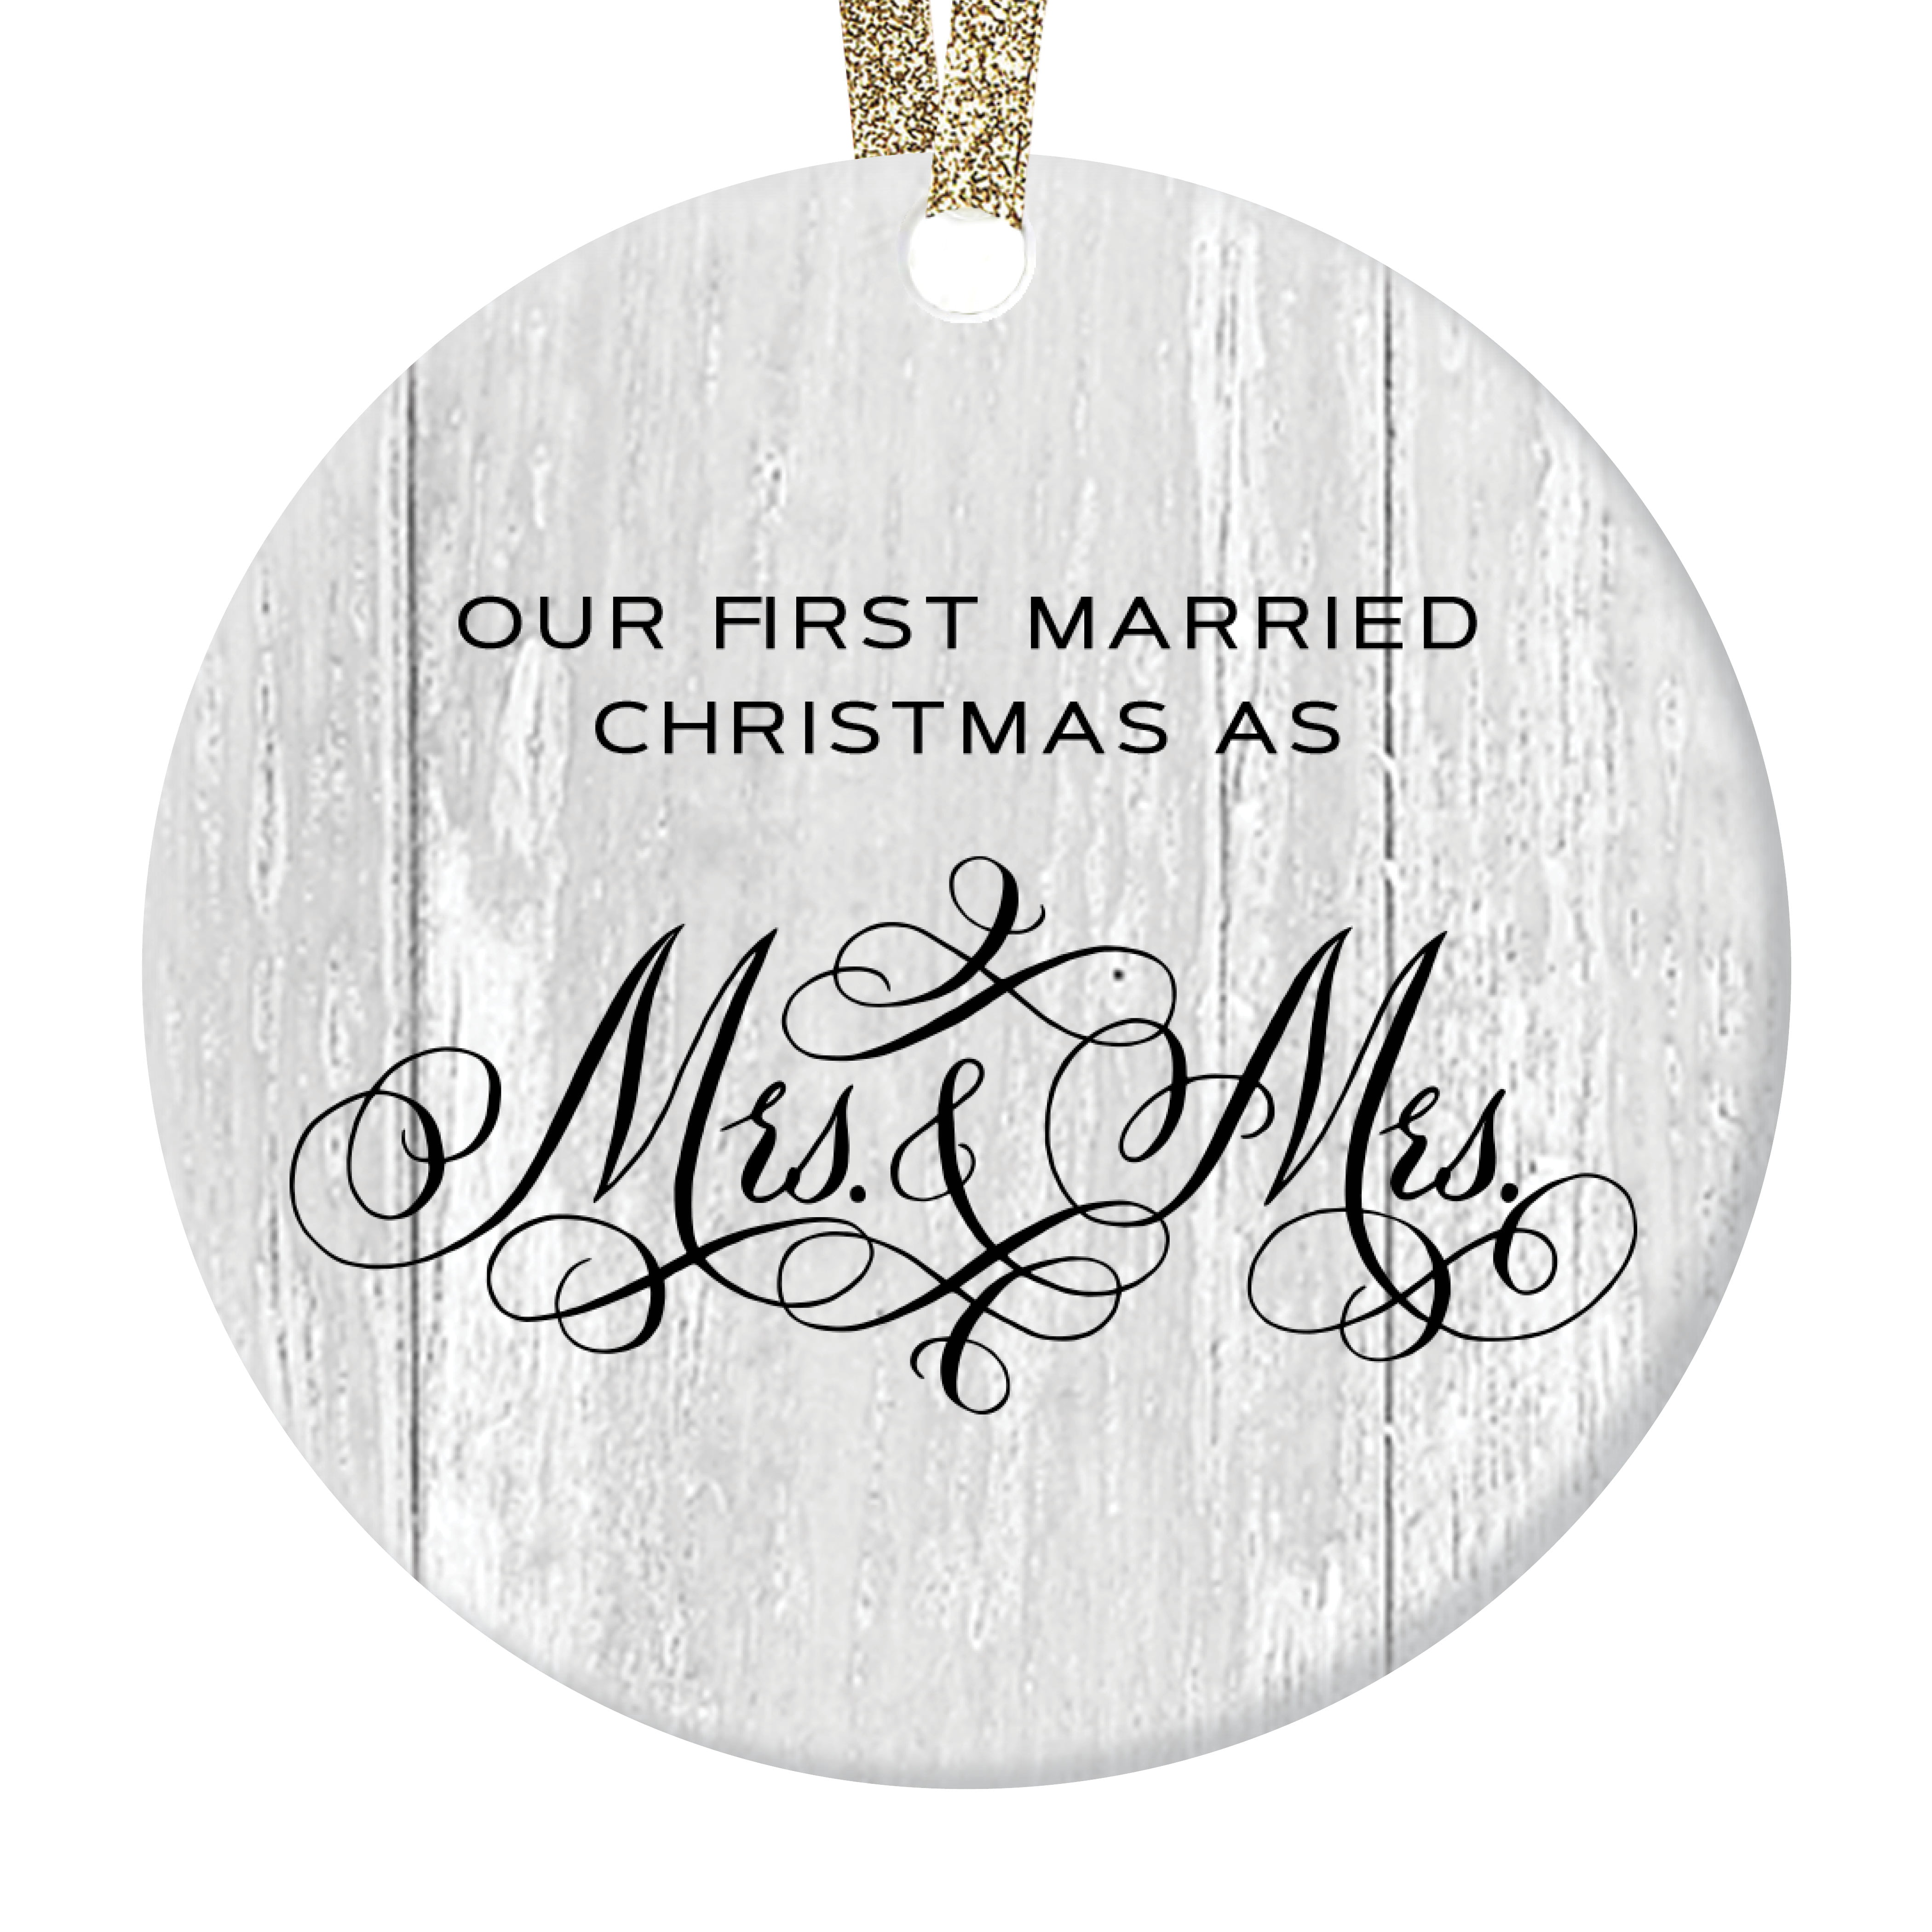 Xmas Holidays Decor for Newlywed Couples 3 inch Flat Stainless Steel Decorations for Just Married Bride Groom Elegant Chef Our First Christmas as Mr & Mrs 2019 Ornament Bridal Shower Wedding Gifts